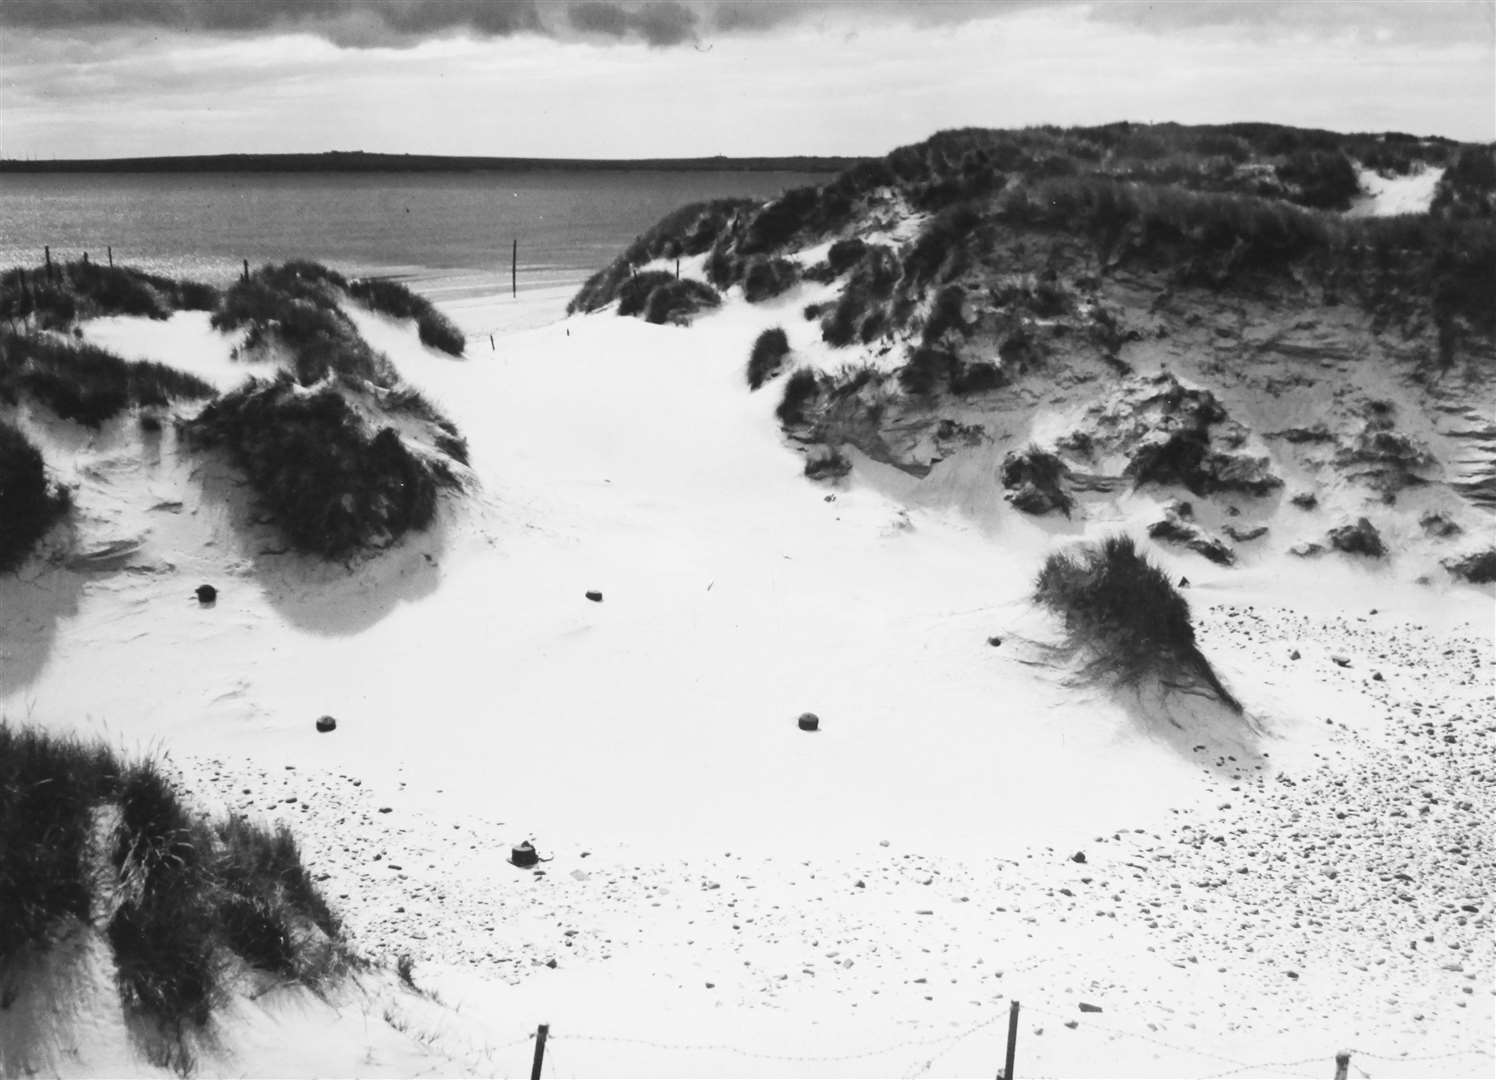 Sinclair's Bay minefield, photographed by Major William Hewitt in 1945 and reproduced courtesy of Alan Stewart.